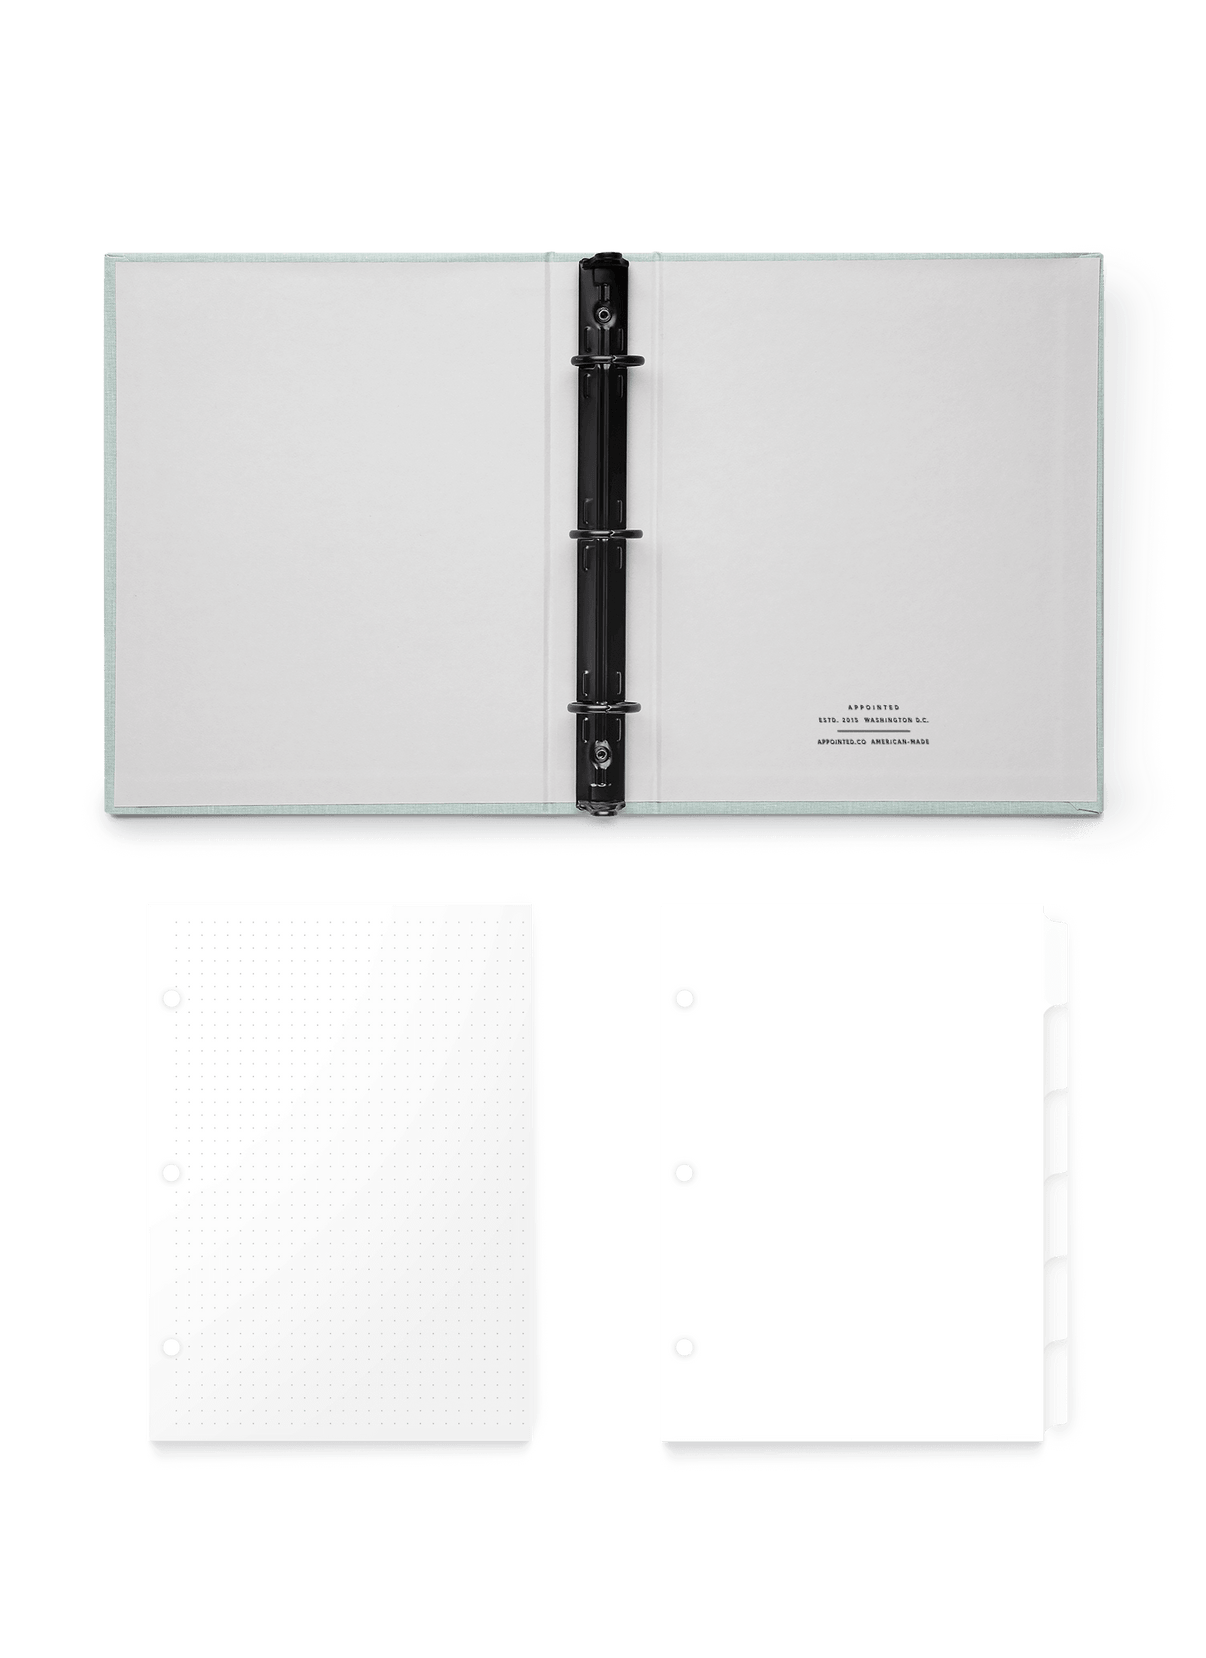 Appointed Mineral Compact Binder open flat with Dot Grid Inserts and Tabs, front view. || Mineral Green